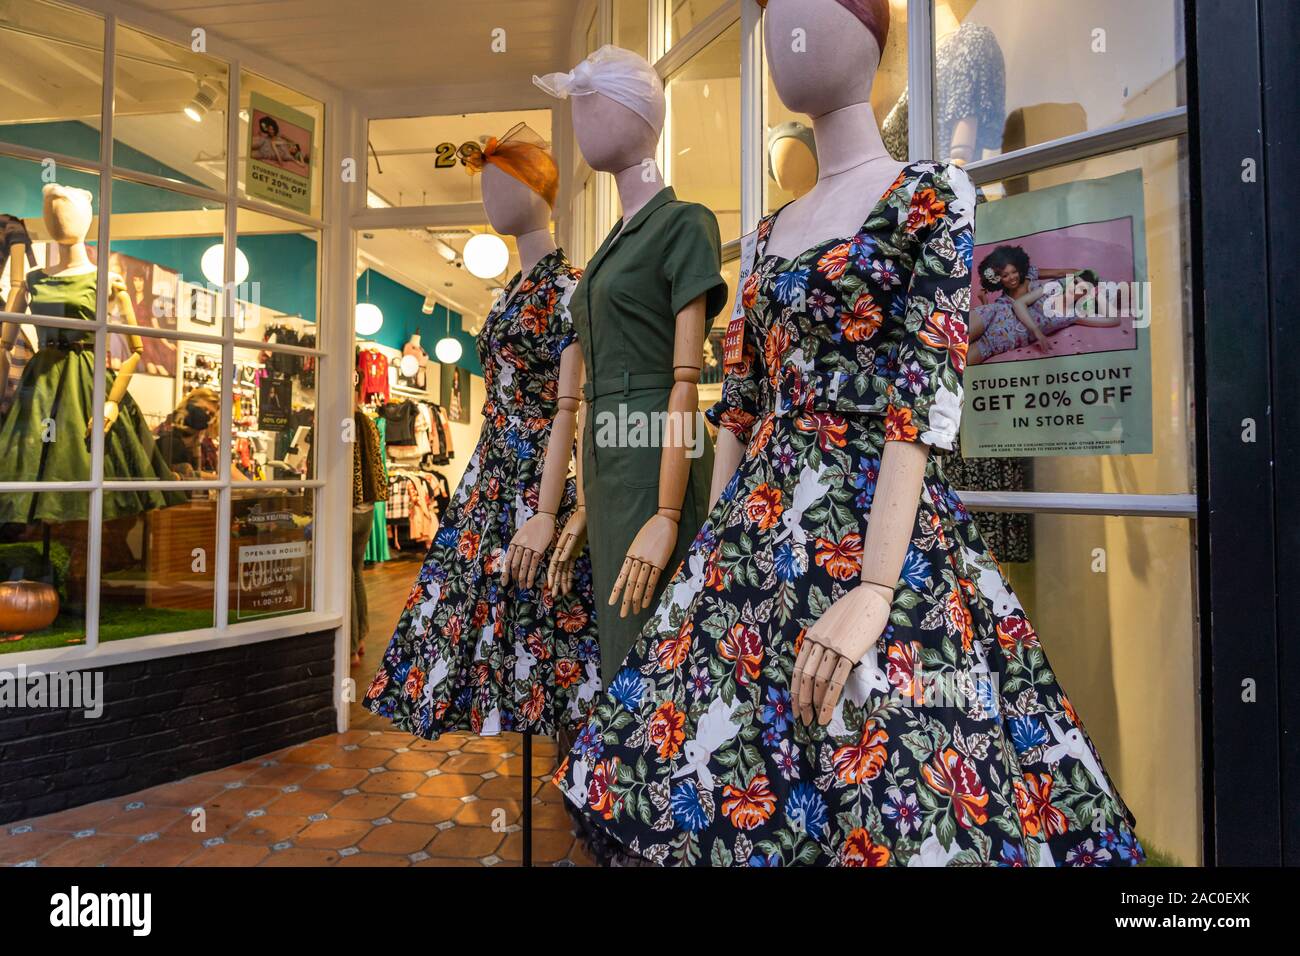 1940s style dresses displayed outside of a shop Stock Photo